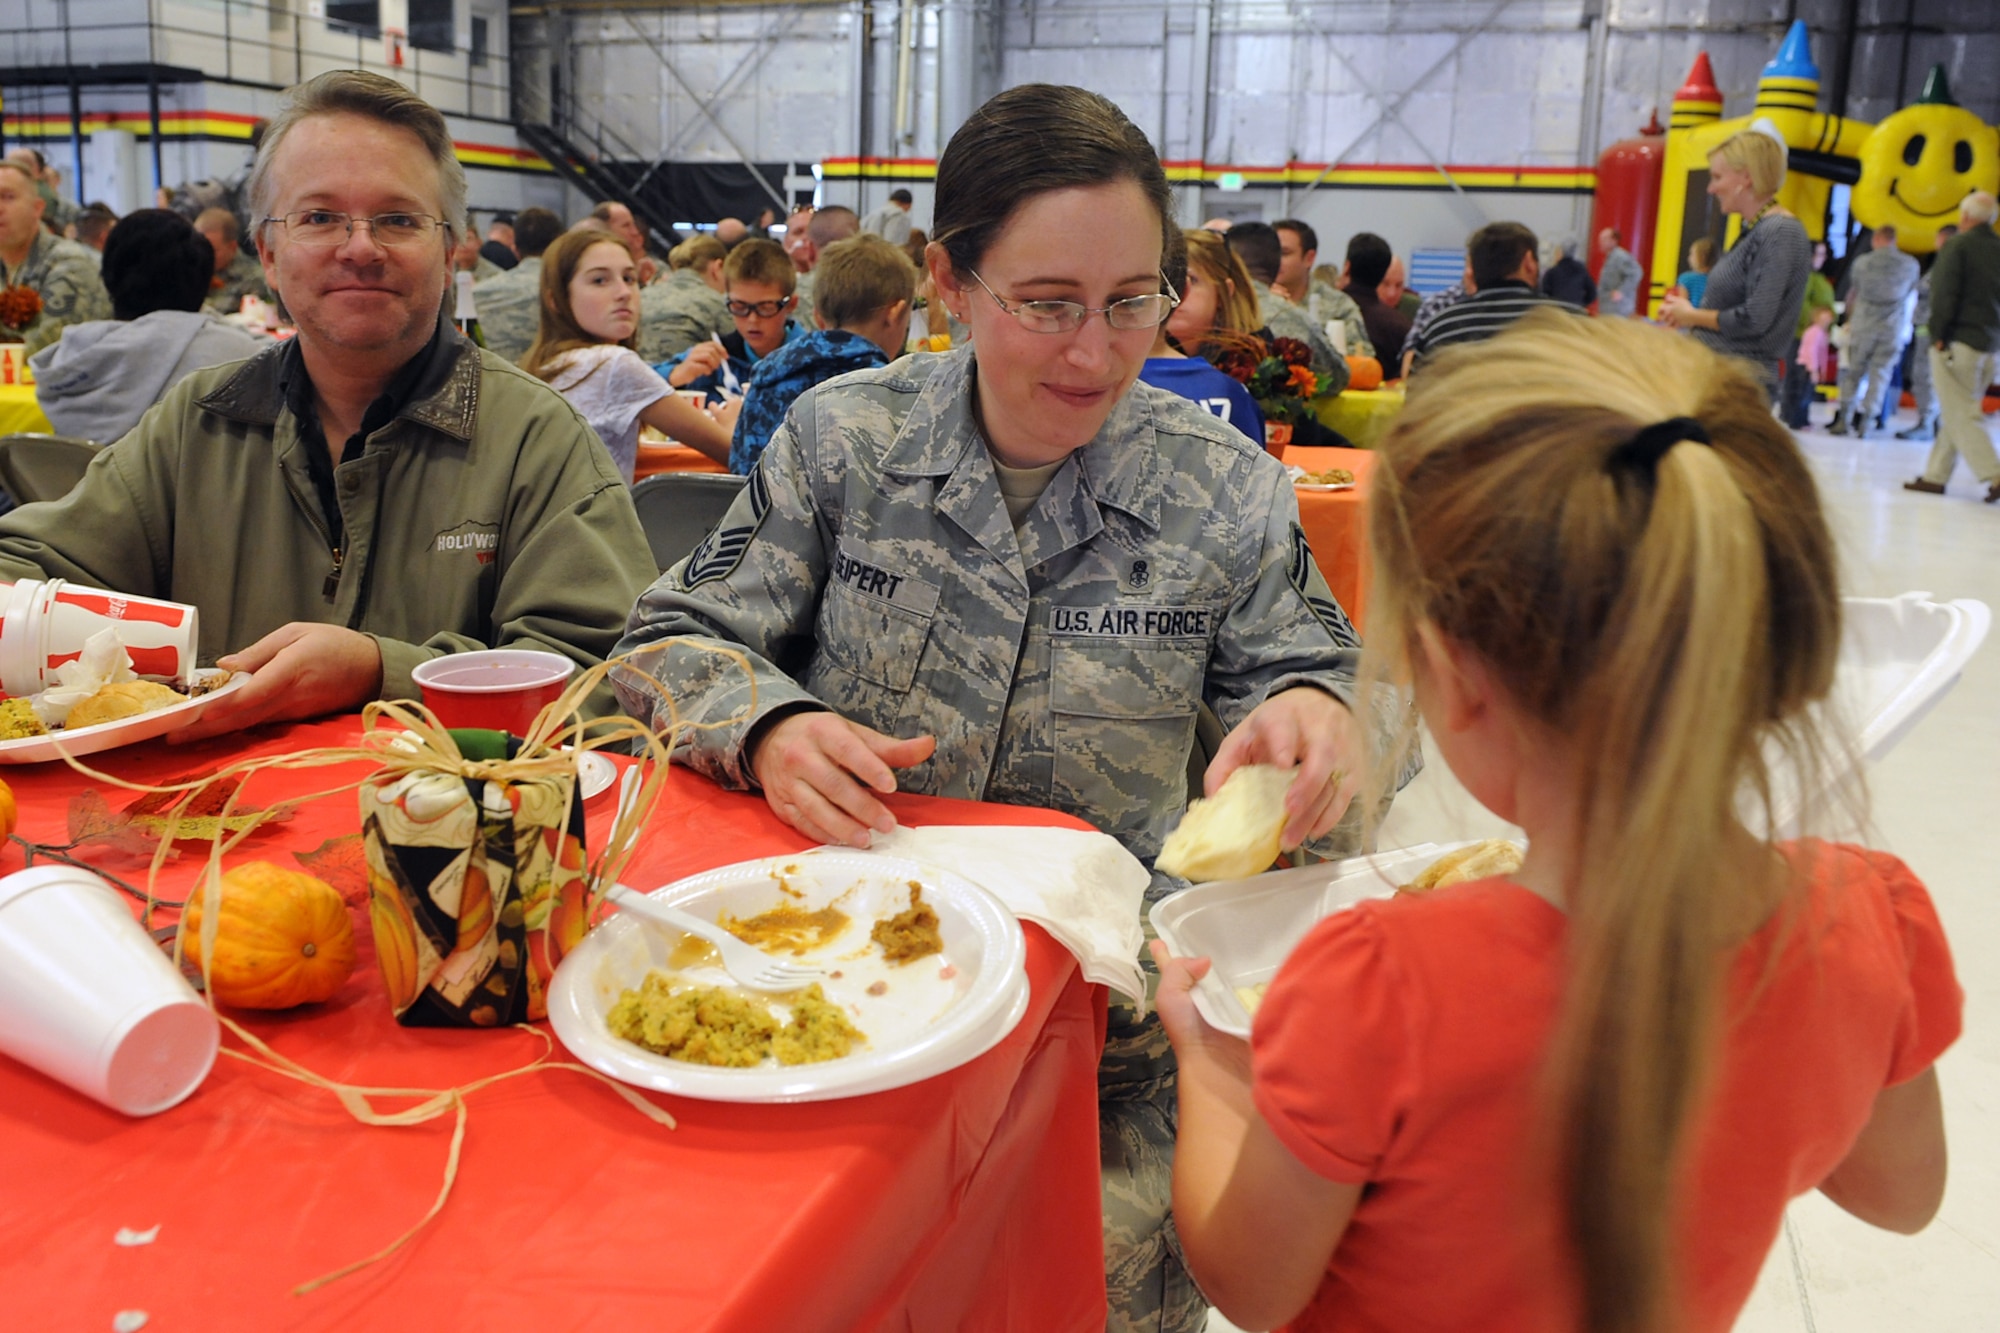 Senior Master Sgt. Cindy Seipert, 419th Medical Squadron, shares leftovers with her six-year-old daughter, Mary. Reservists and their families joined their active duty for a holiday celebration here today. (U.S. Air Force photo/Alex Lloyd)